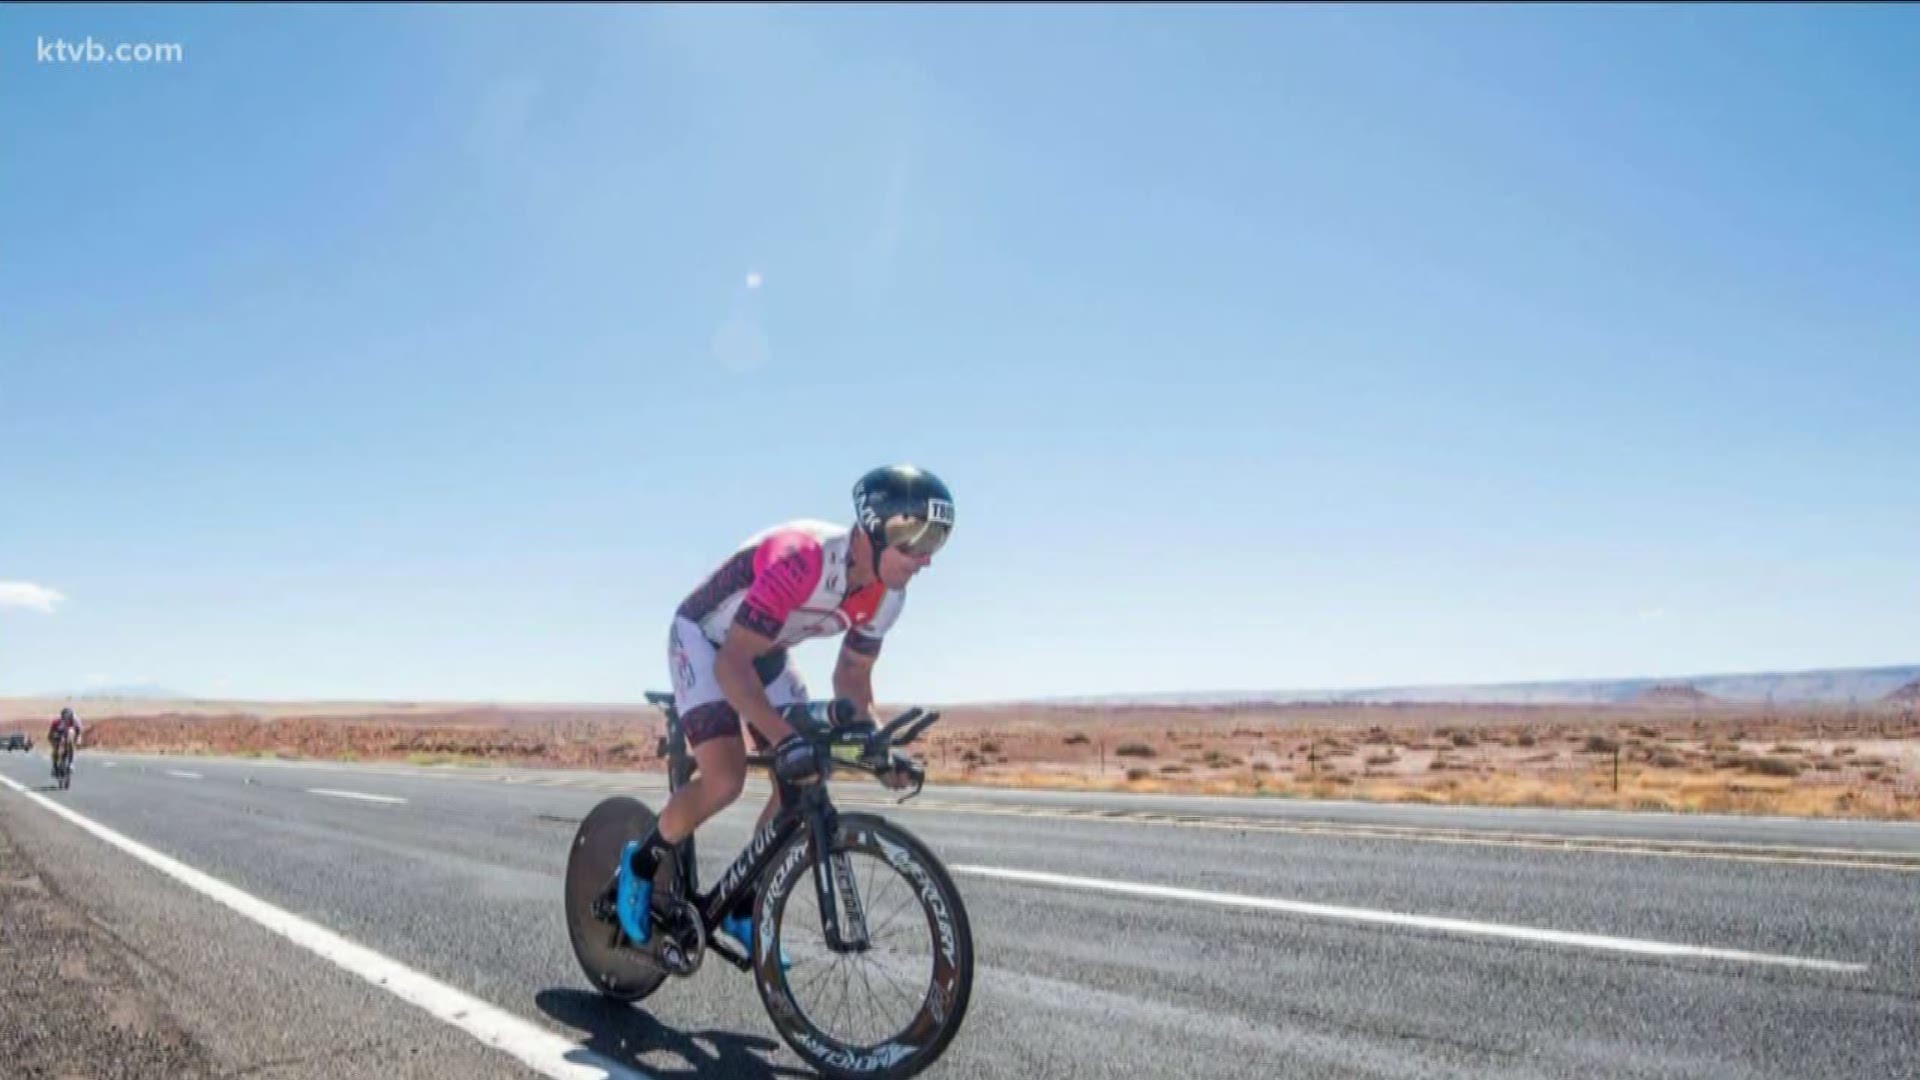 The Race Across America is known as the world's toughest bicycle race. A Boise man is part of the team that finished the 3000 mile race in just five days.